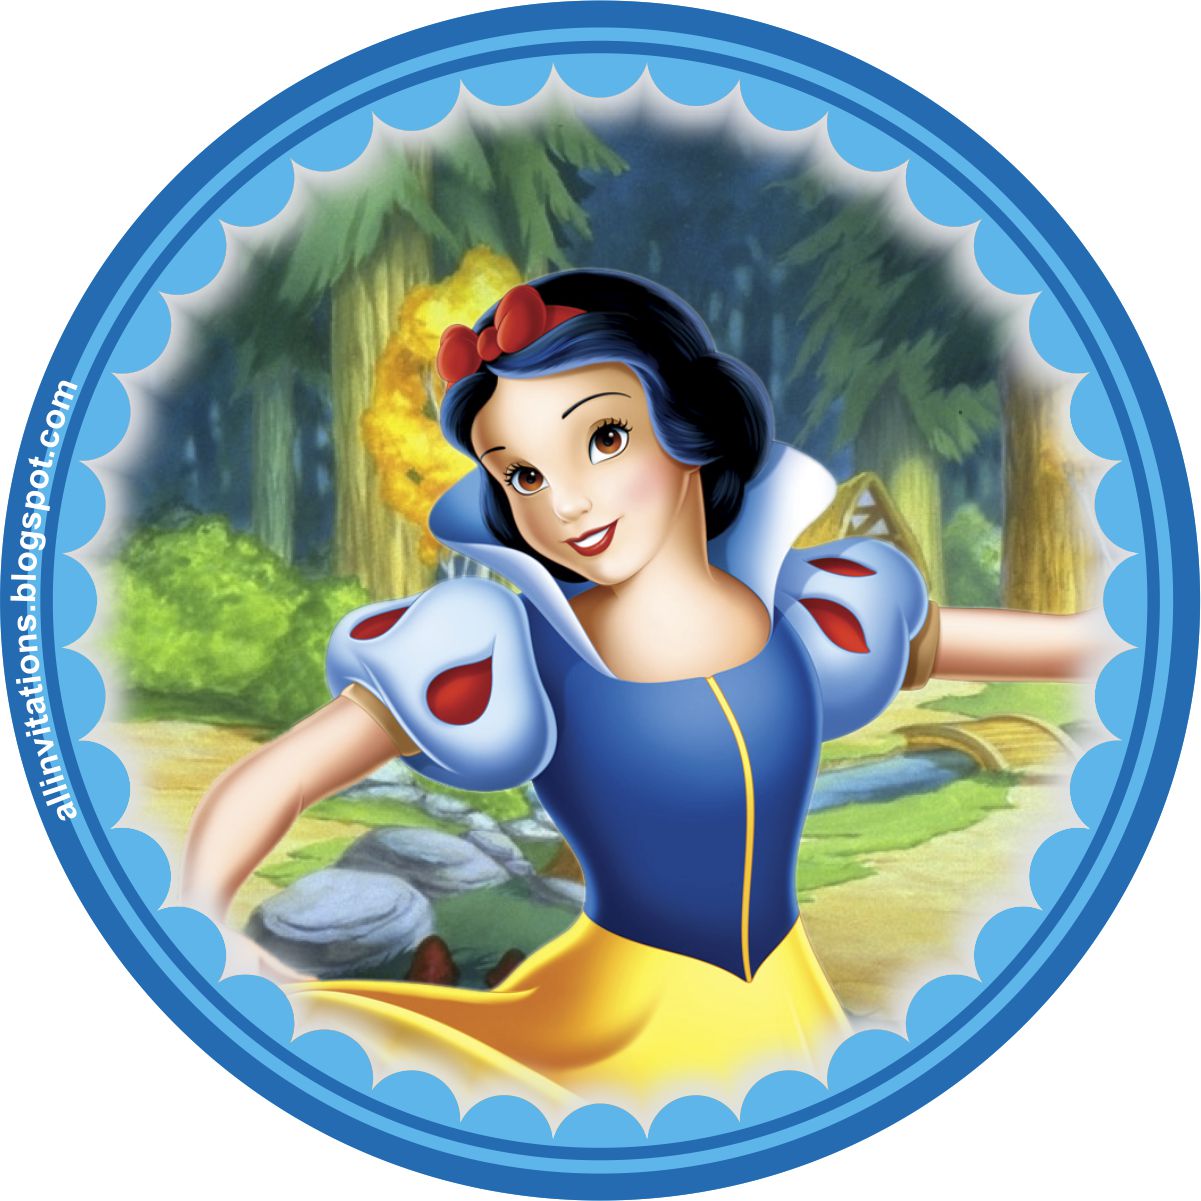 Amazing Blancanieves Pictures & Backgrounds